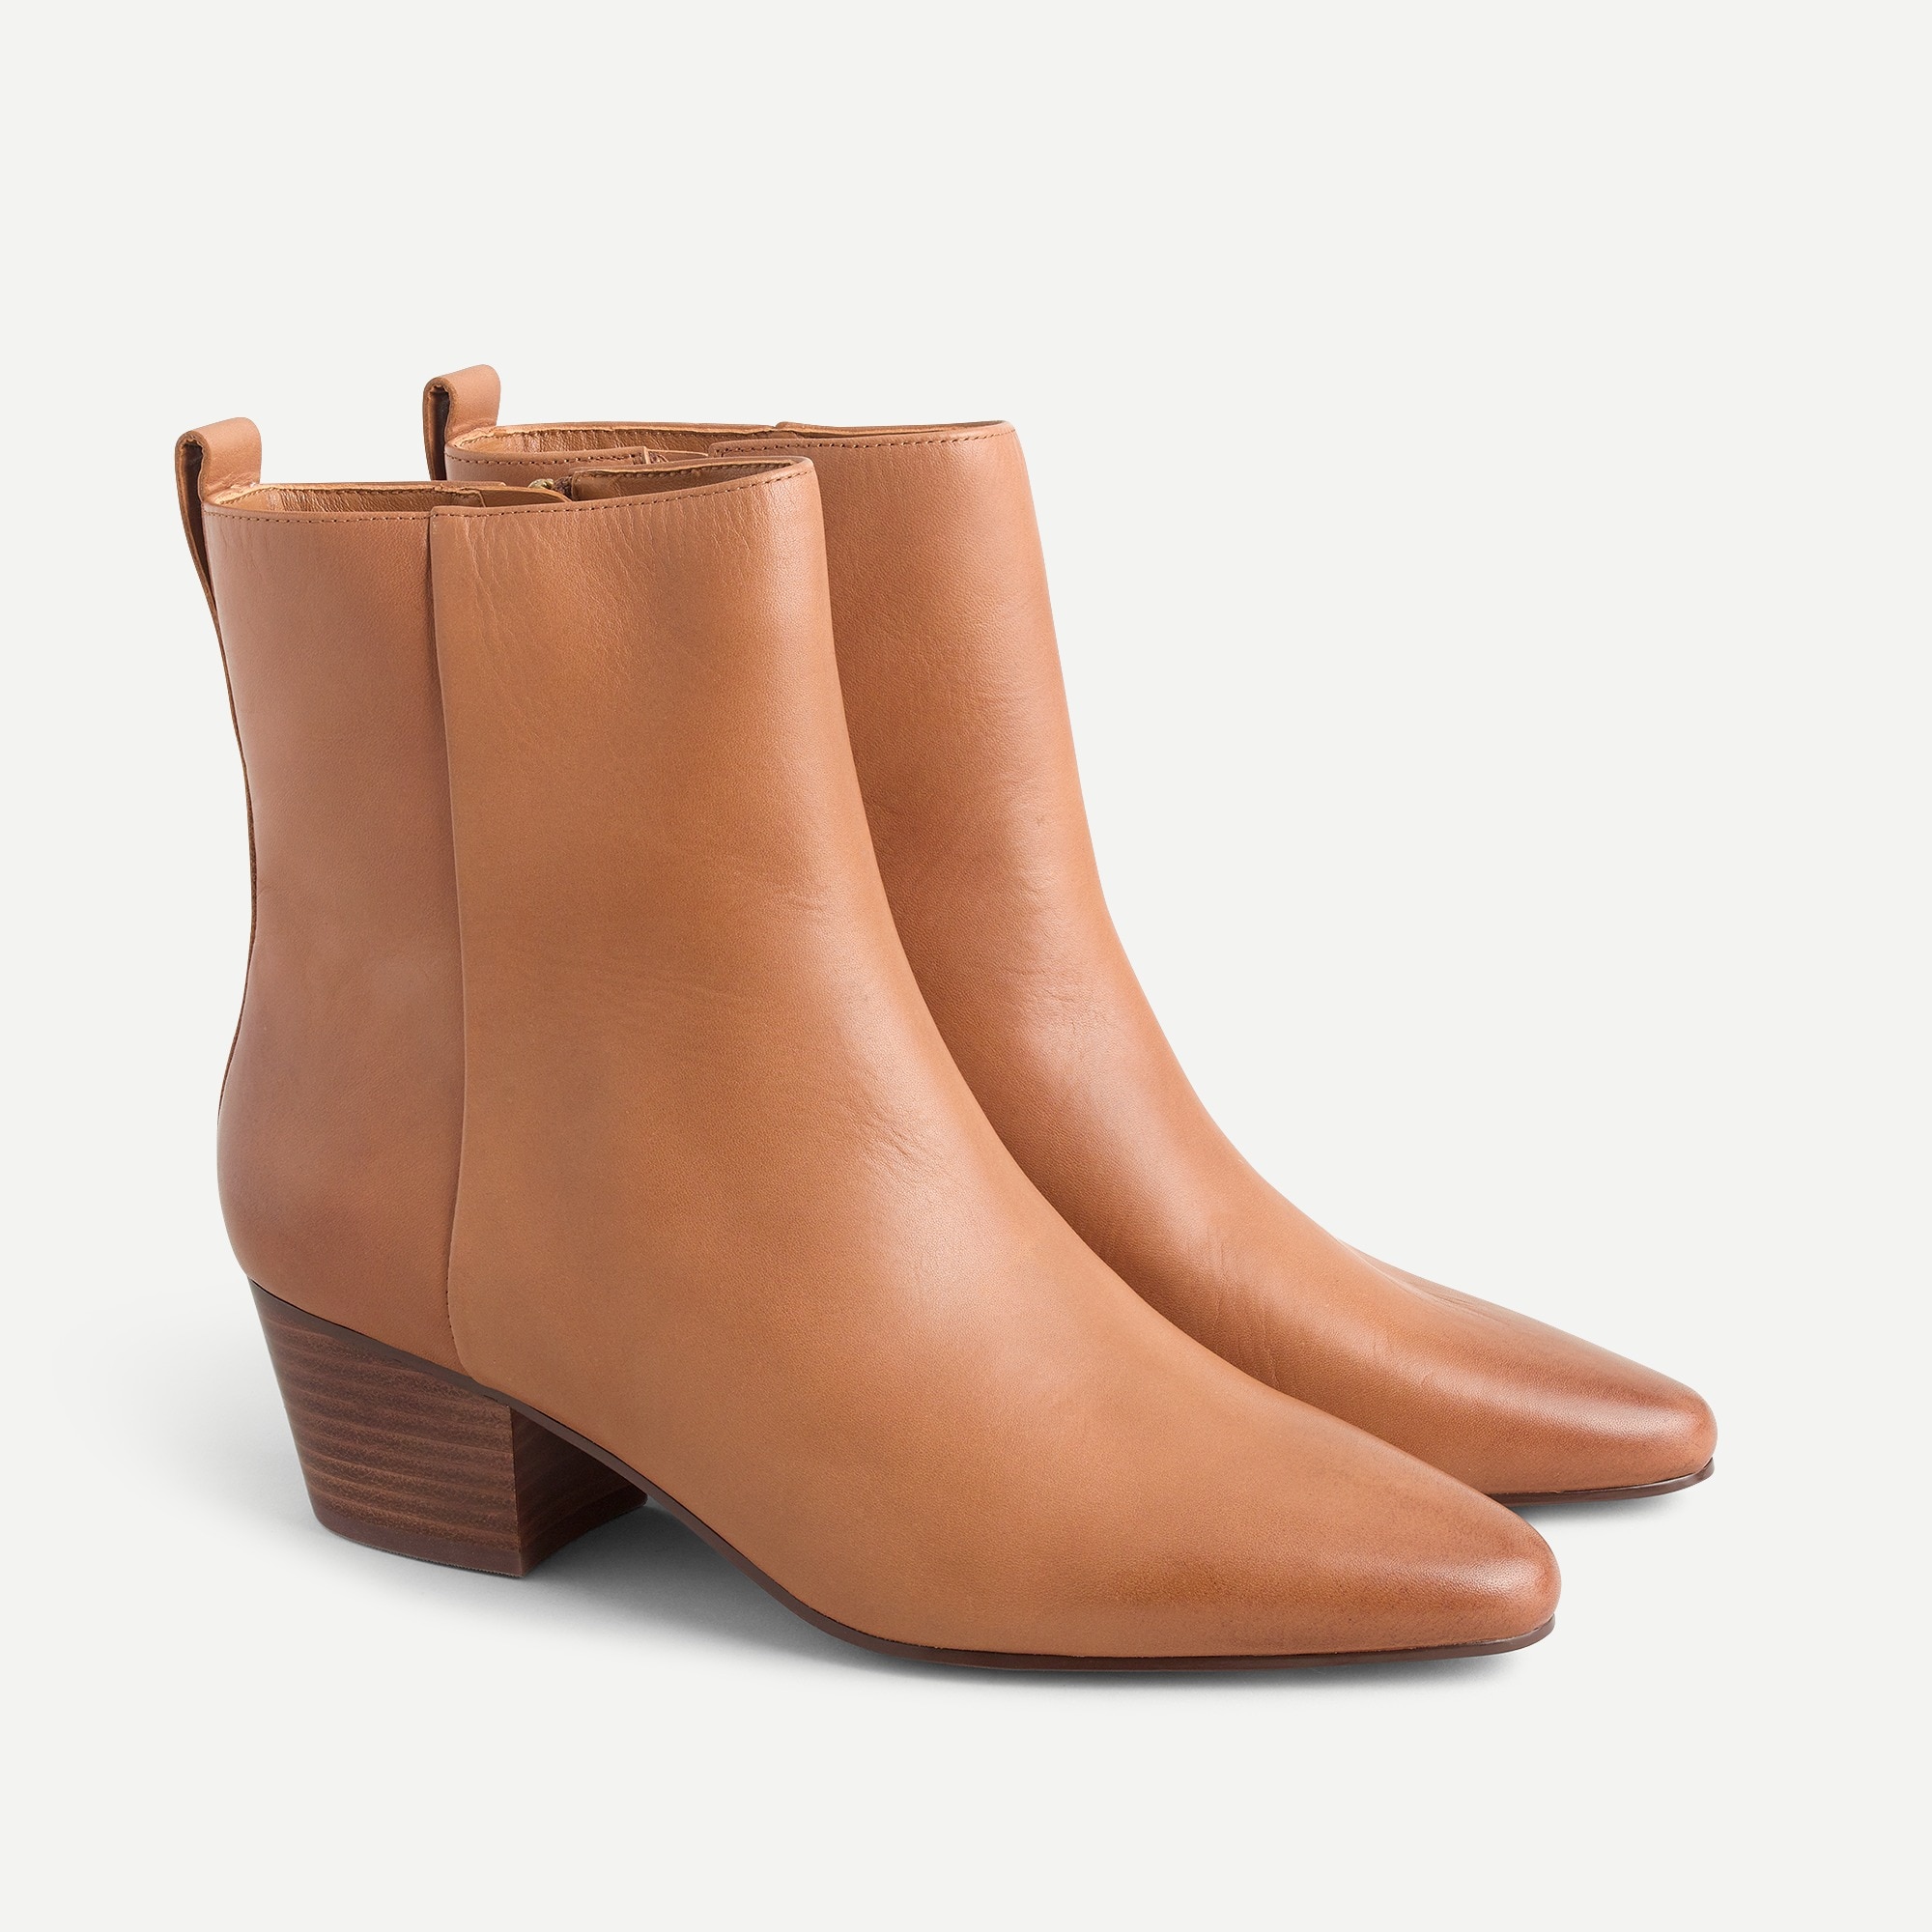 leather boots for women online